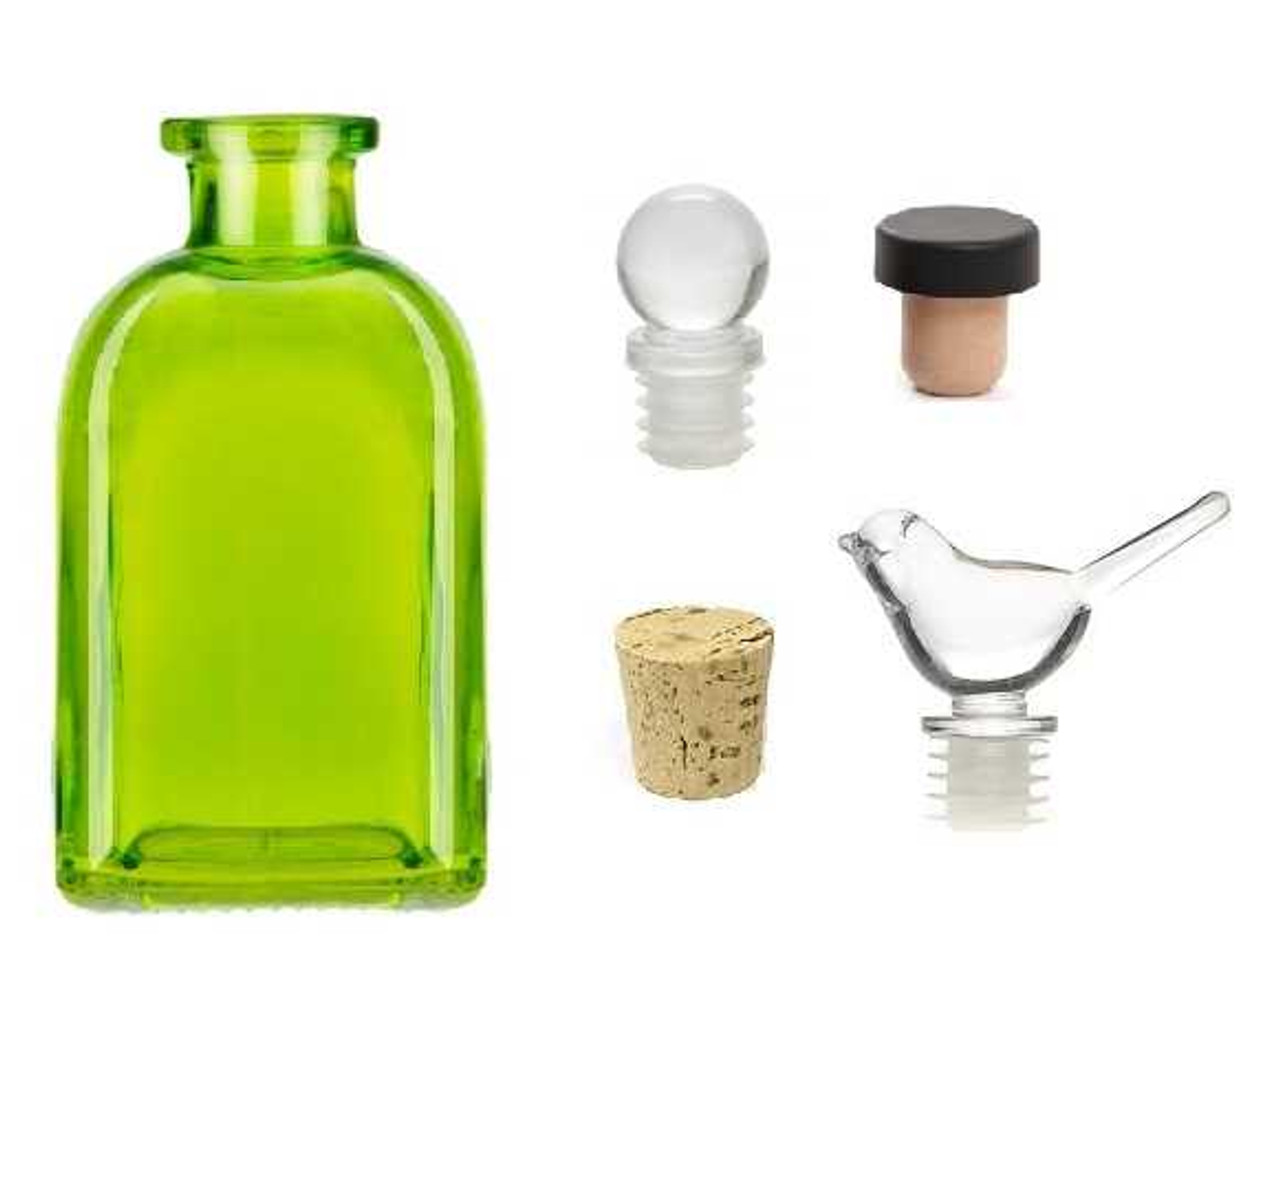 https://cdn11.bigcommerce.com/s-1ybtx/images/stencil/1280x1280/products/880/6114/8-oz-Green-Recycled-Boston-Glass-Bottle-with-Cork-Stopper_5025__82857.1699988466.jpg?c=2?imbypass=on